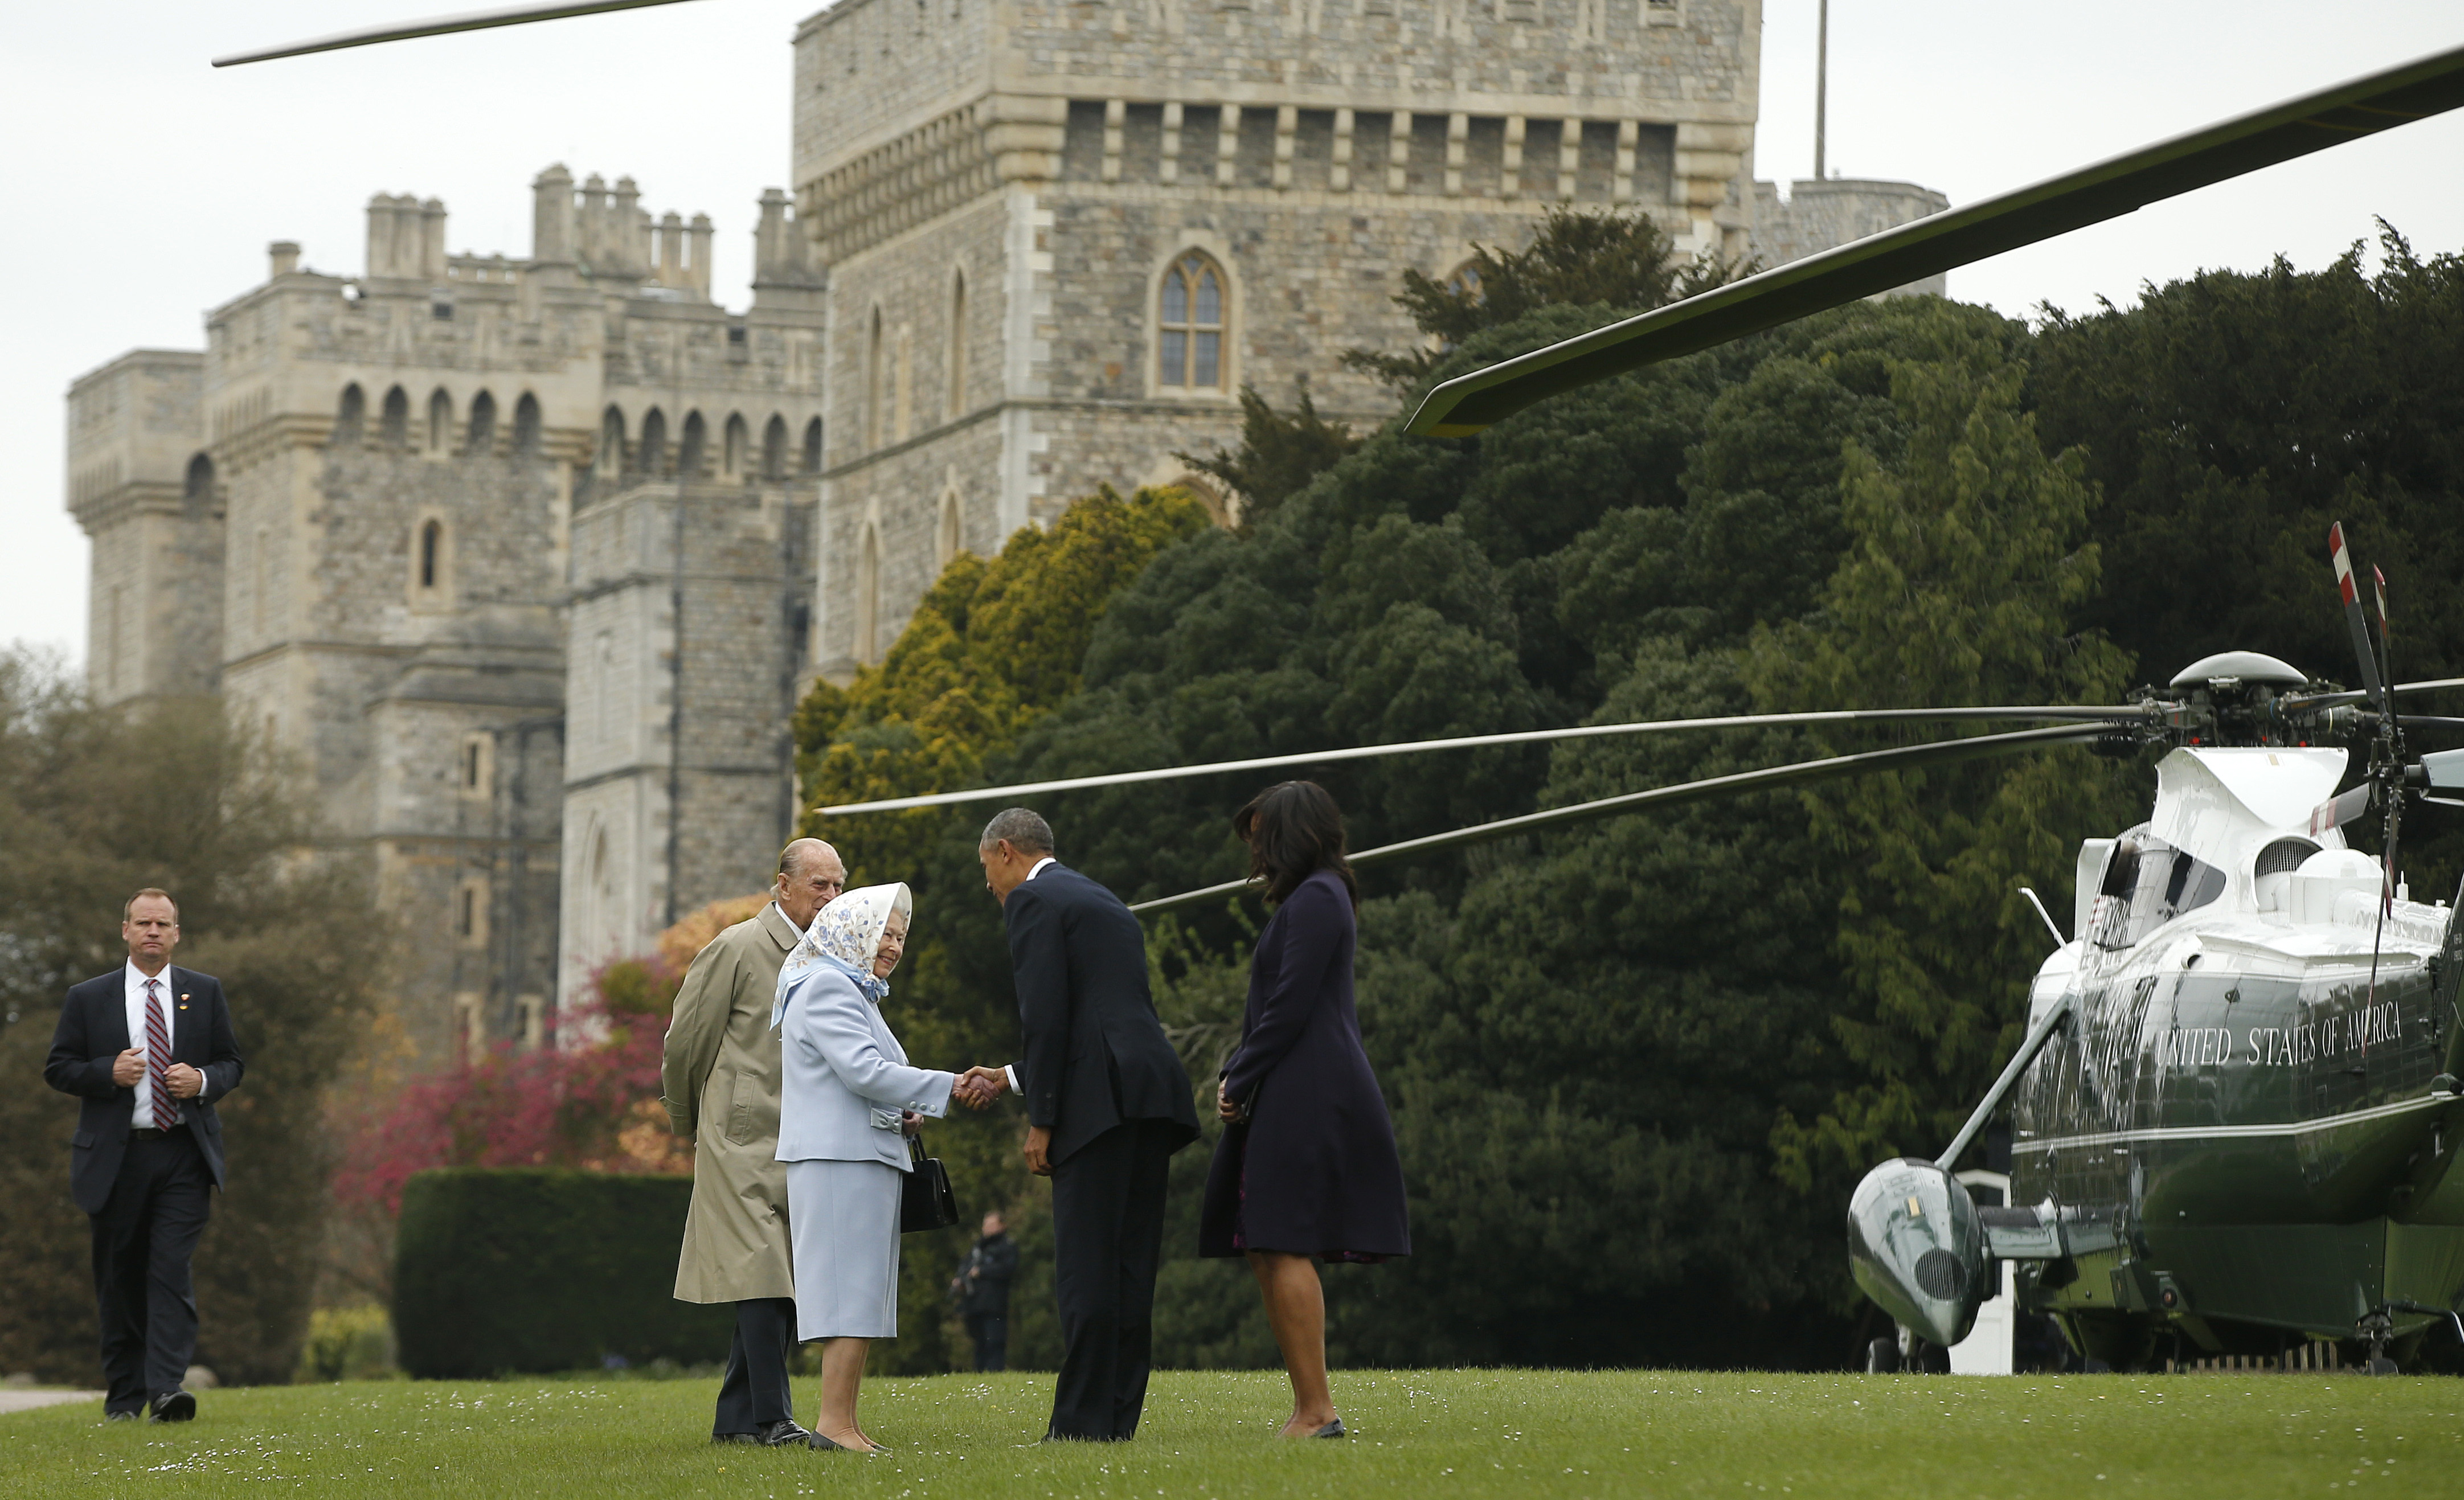 The Queen welcomes President Obama to Windsor Castle